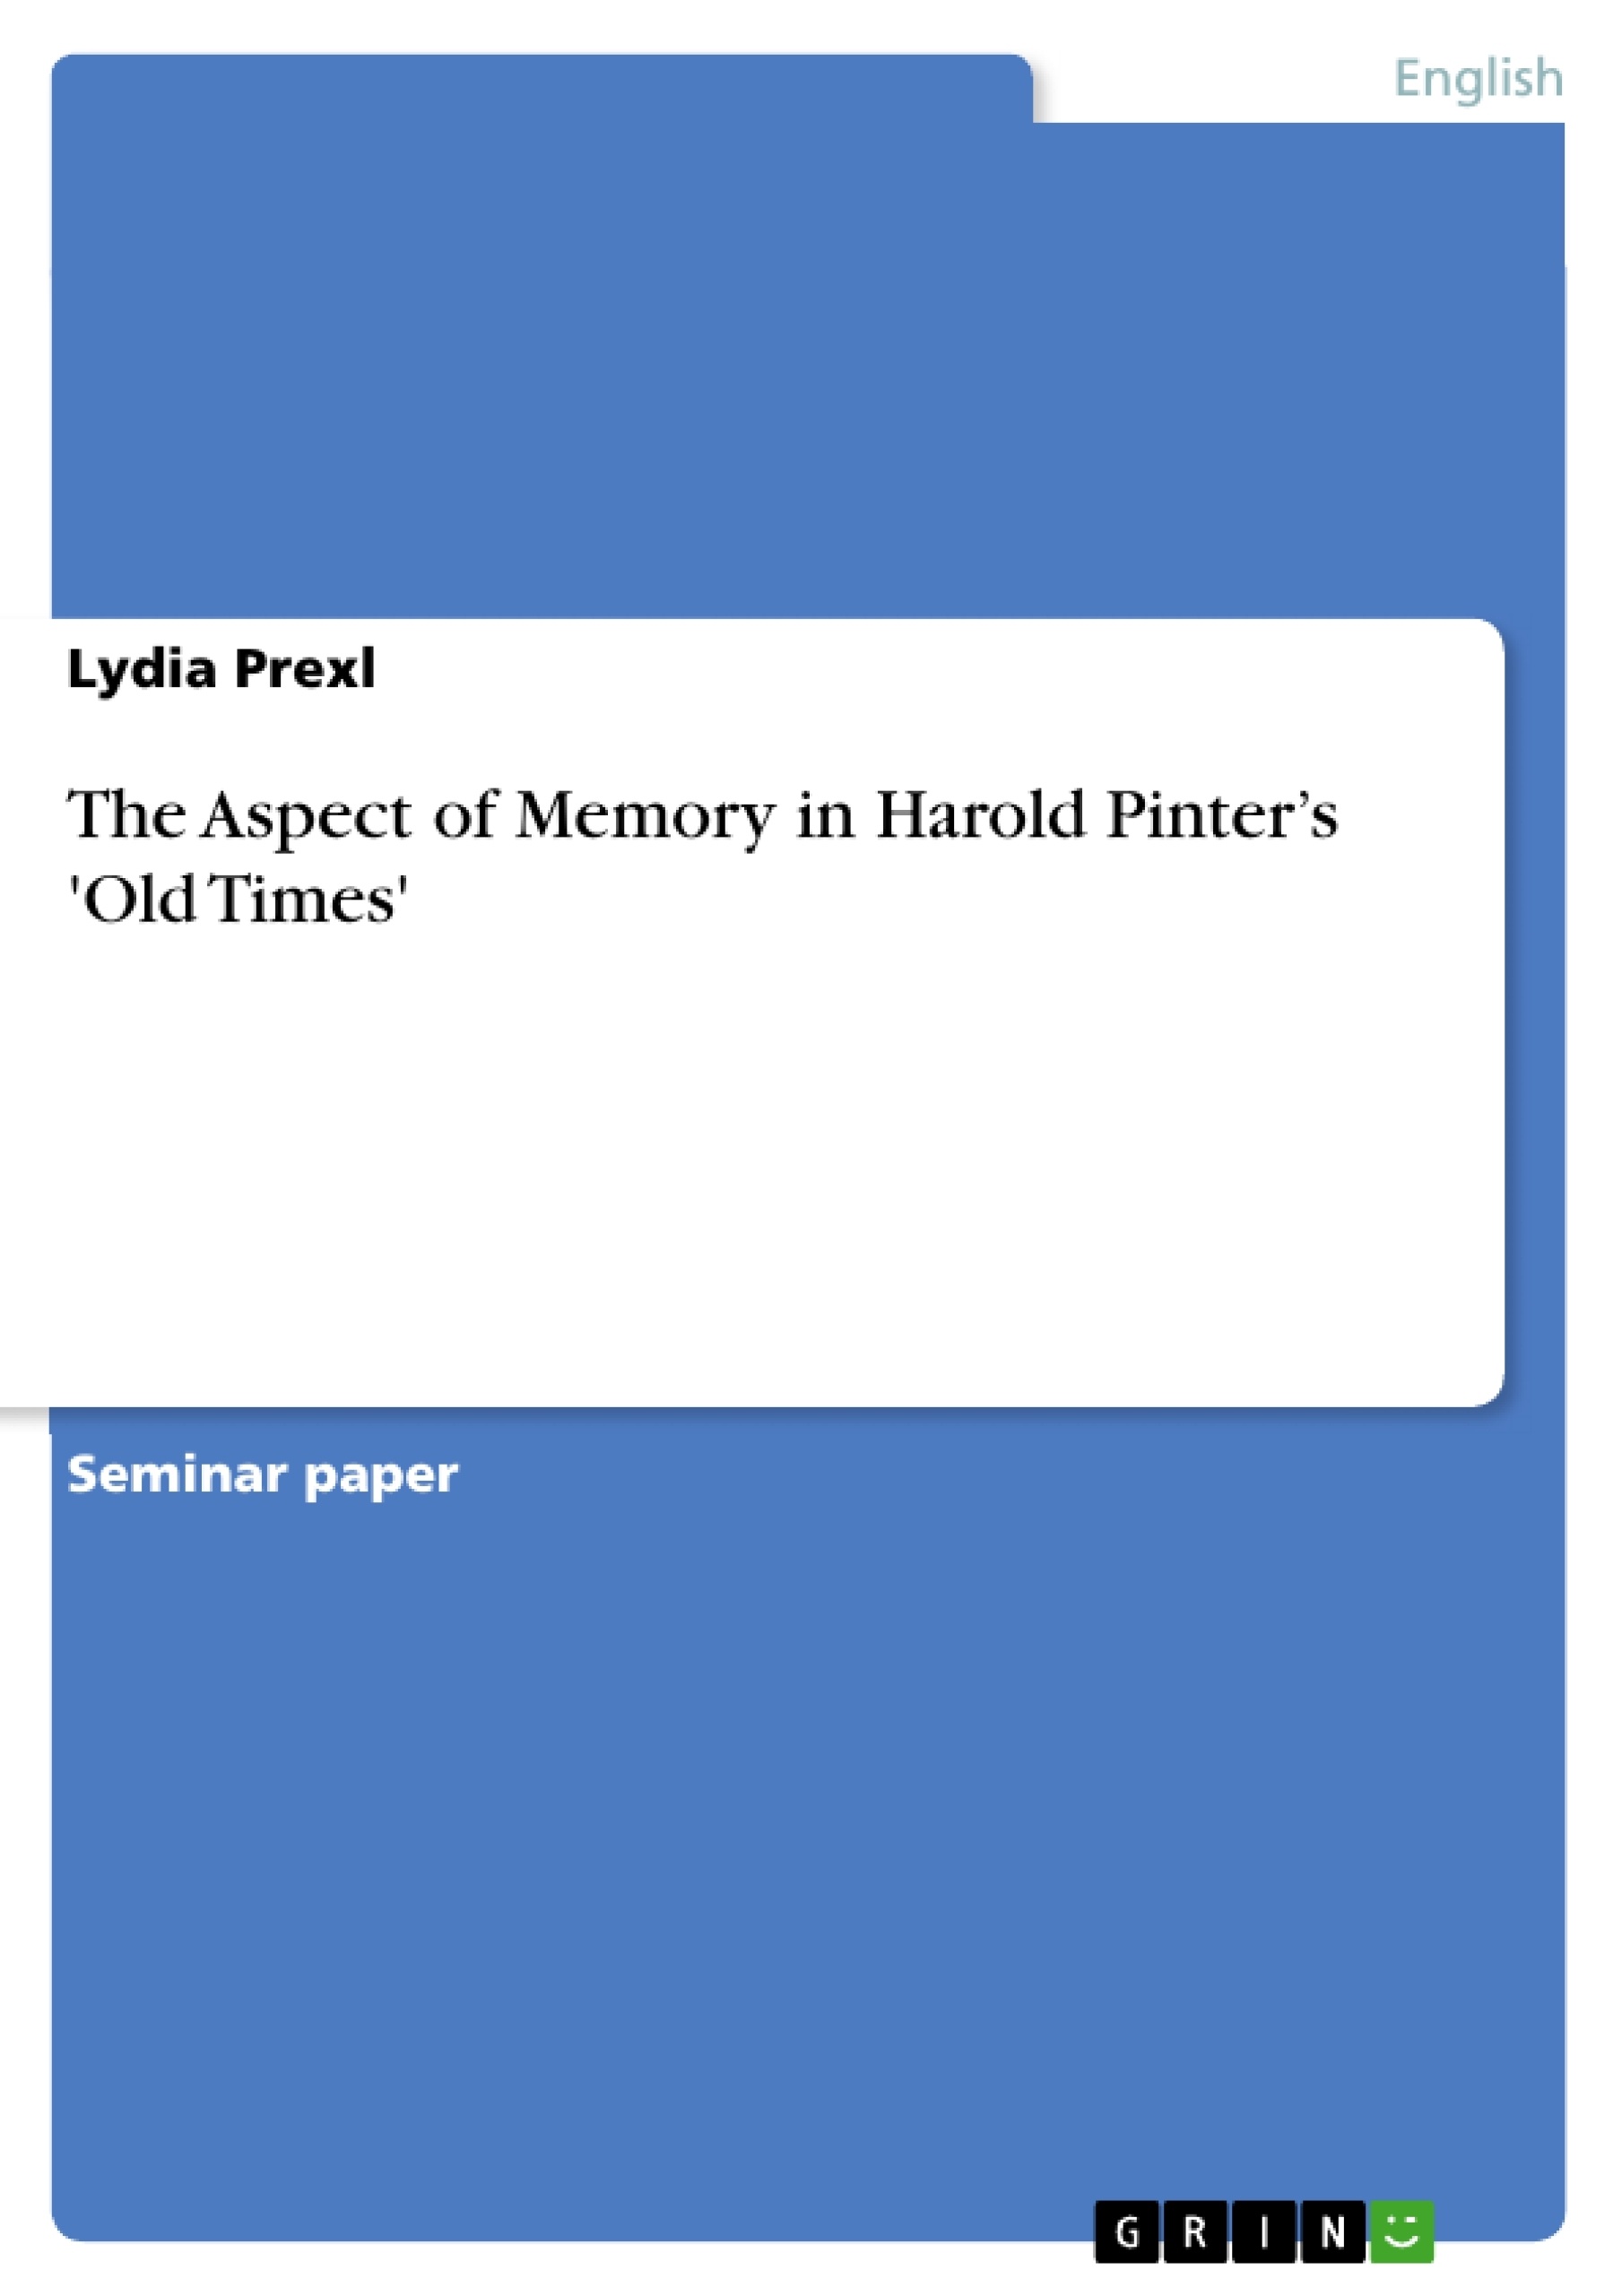 Título: The Aspect of Memory in Harold Pinter’s 'Old Times'